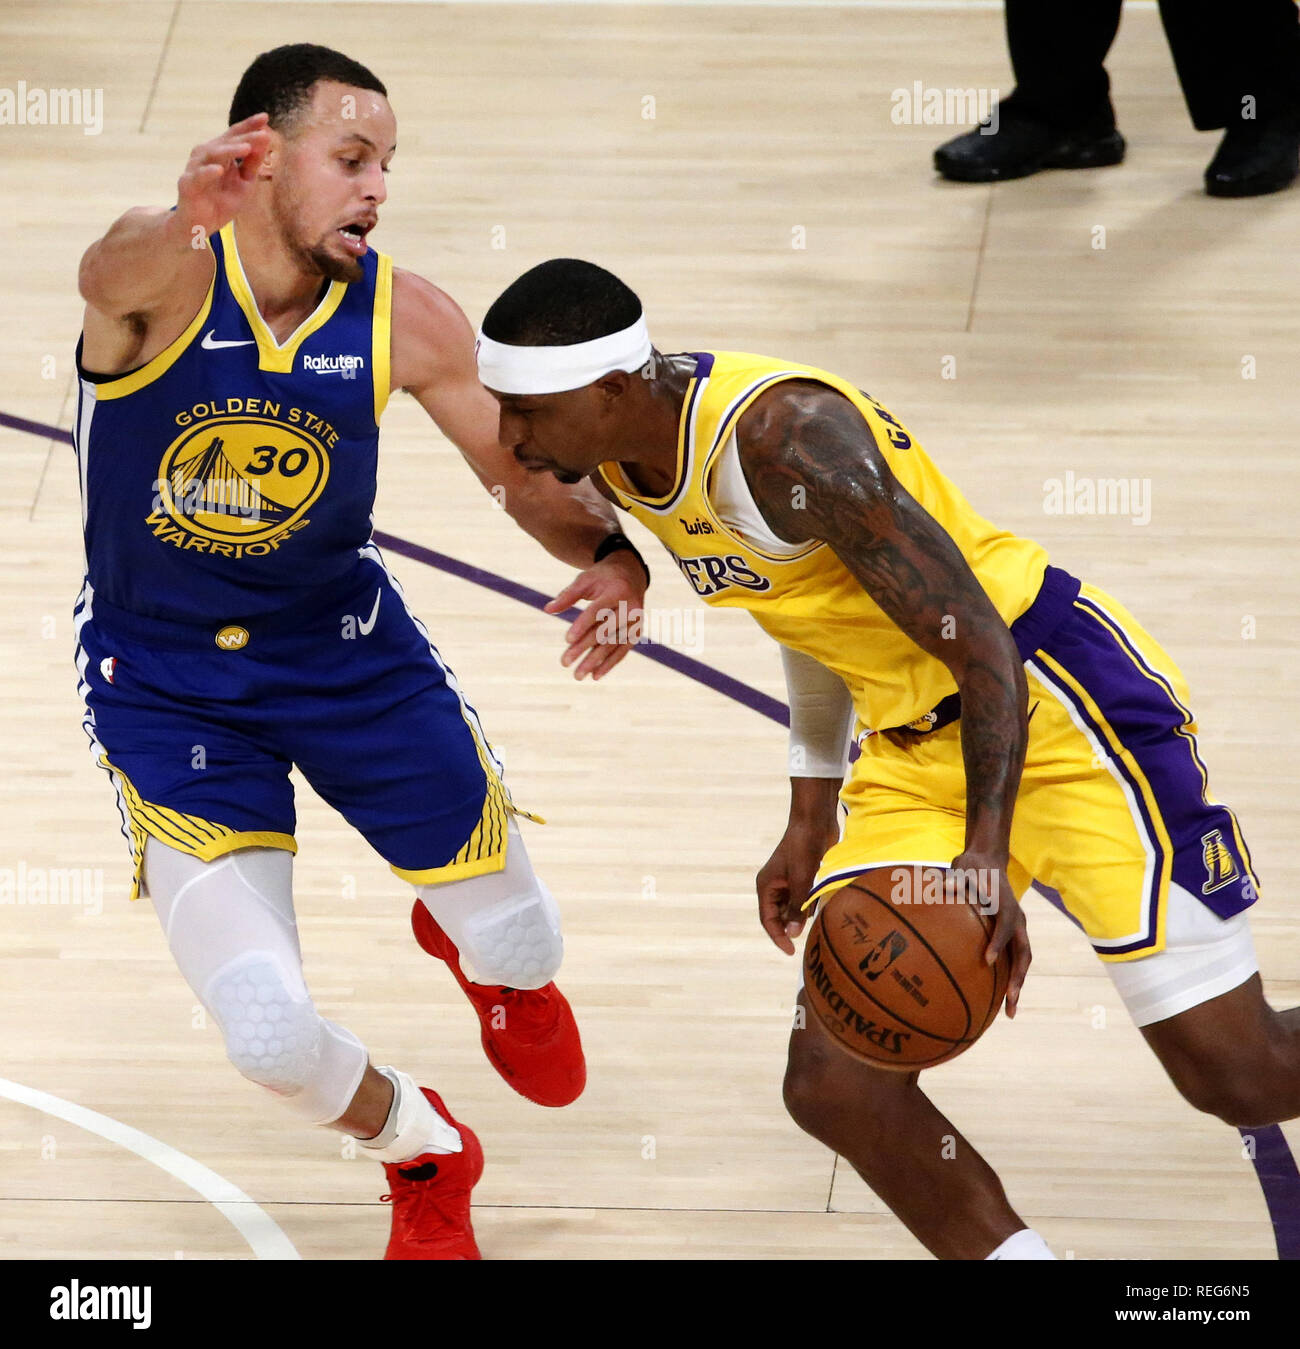 Los Angeles, California, USA. 21st Jan, 2019. Los Angeles Lakers' Kentavious Caldwell-Pope (1) drives against Golden State Warriors' Stephen Curry (30) during an NBA basketball game between Los Angeles Lakers and Golden State Warriors Monday, Jan. 21, 2019, in Los Angeles. Credit: Ringo Chiu/ZUMA Wire/Alamy Live News Stock Photo